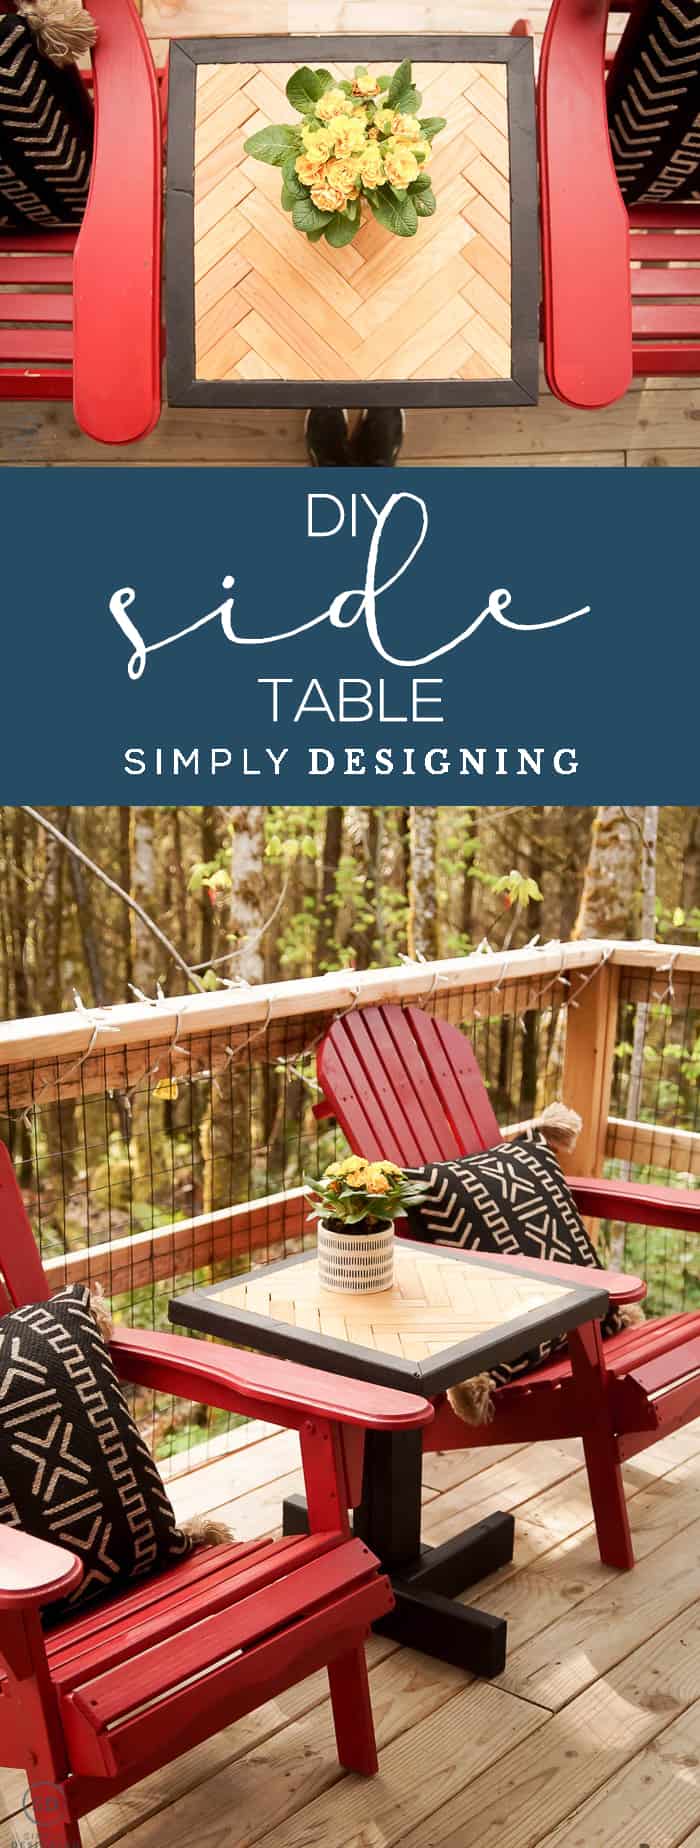 This beautiful DIY Side Table is a great way to create a stunning end table for inside or outside with scrap wood you may already have